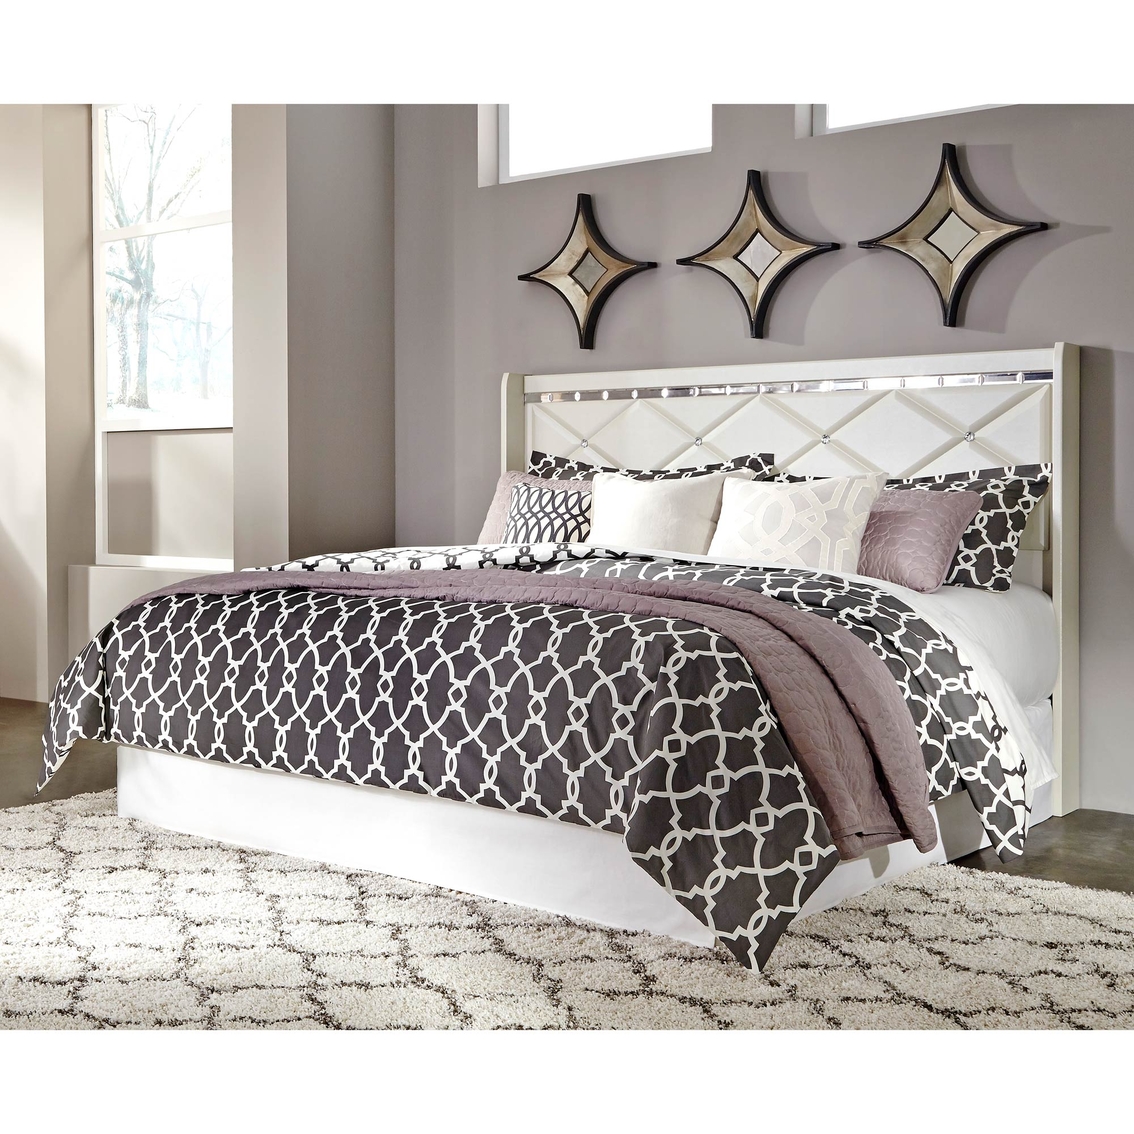 Signature Design by Ashley Dreamur Headboard - Image 3 of 4